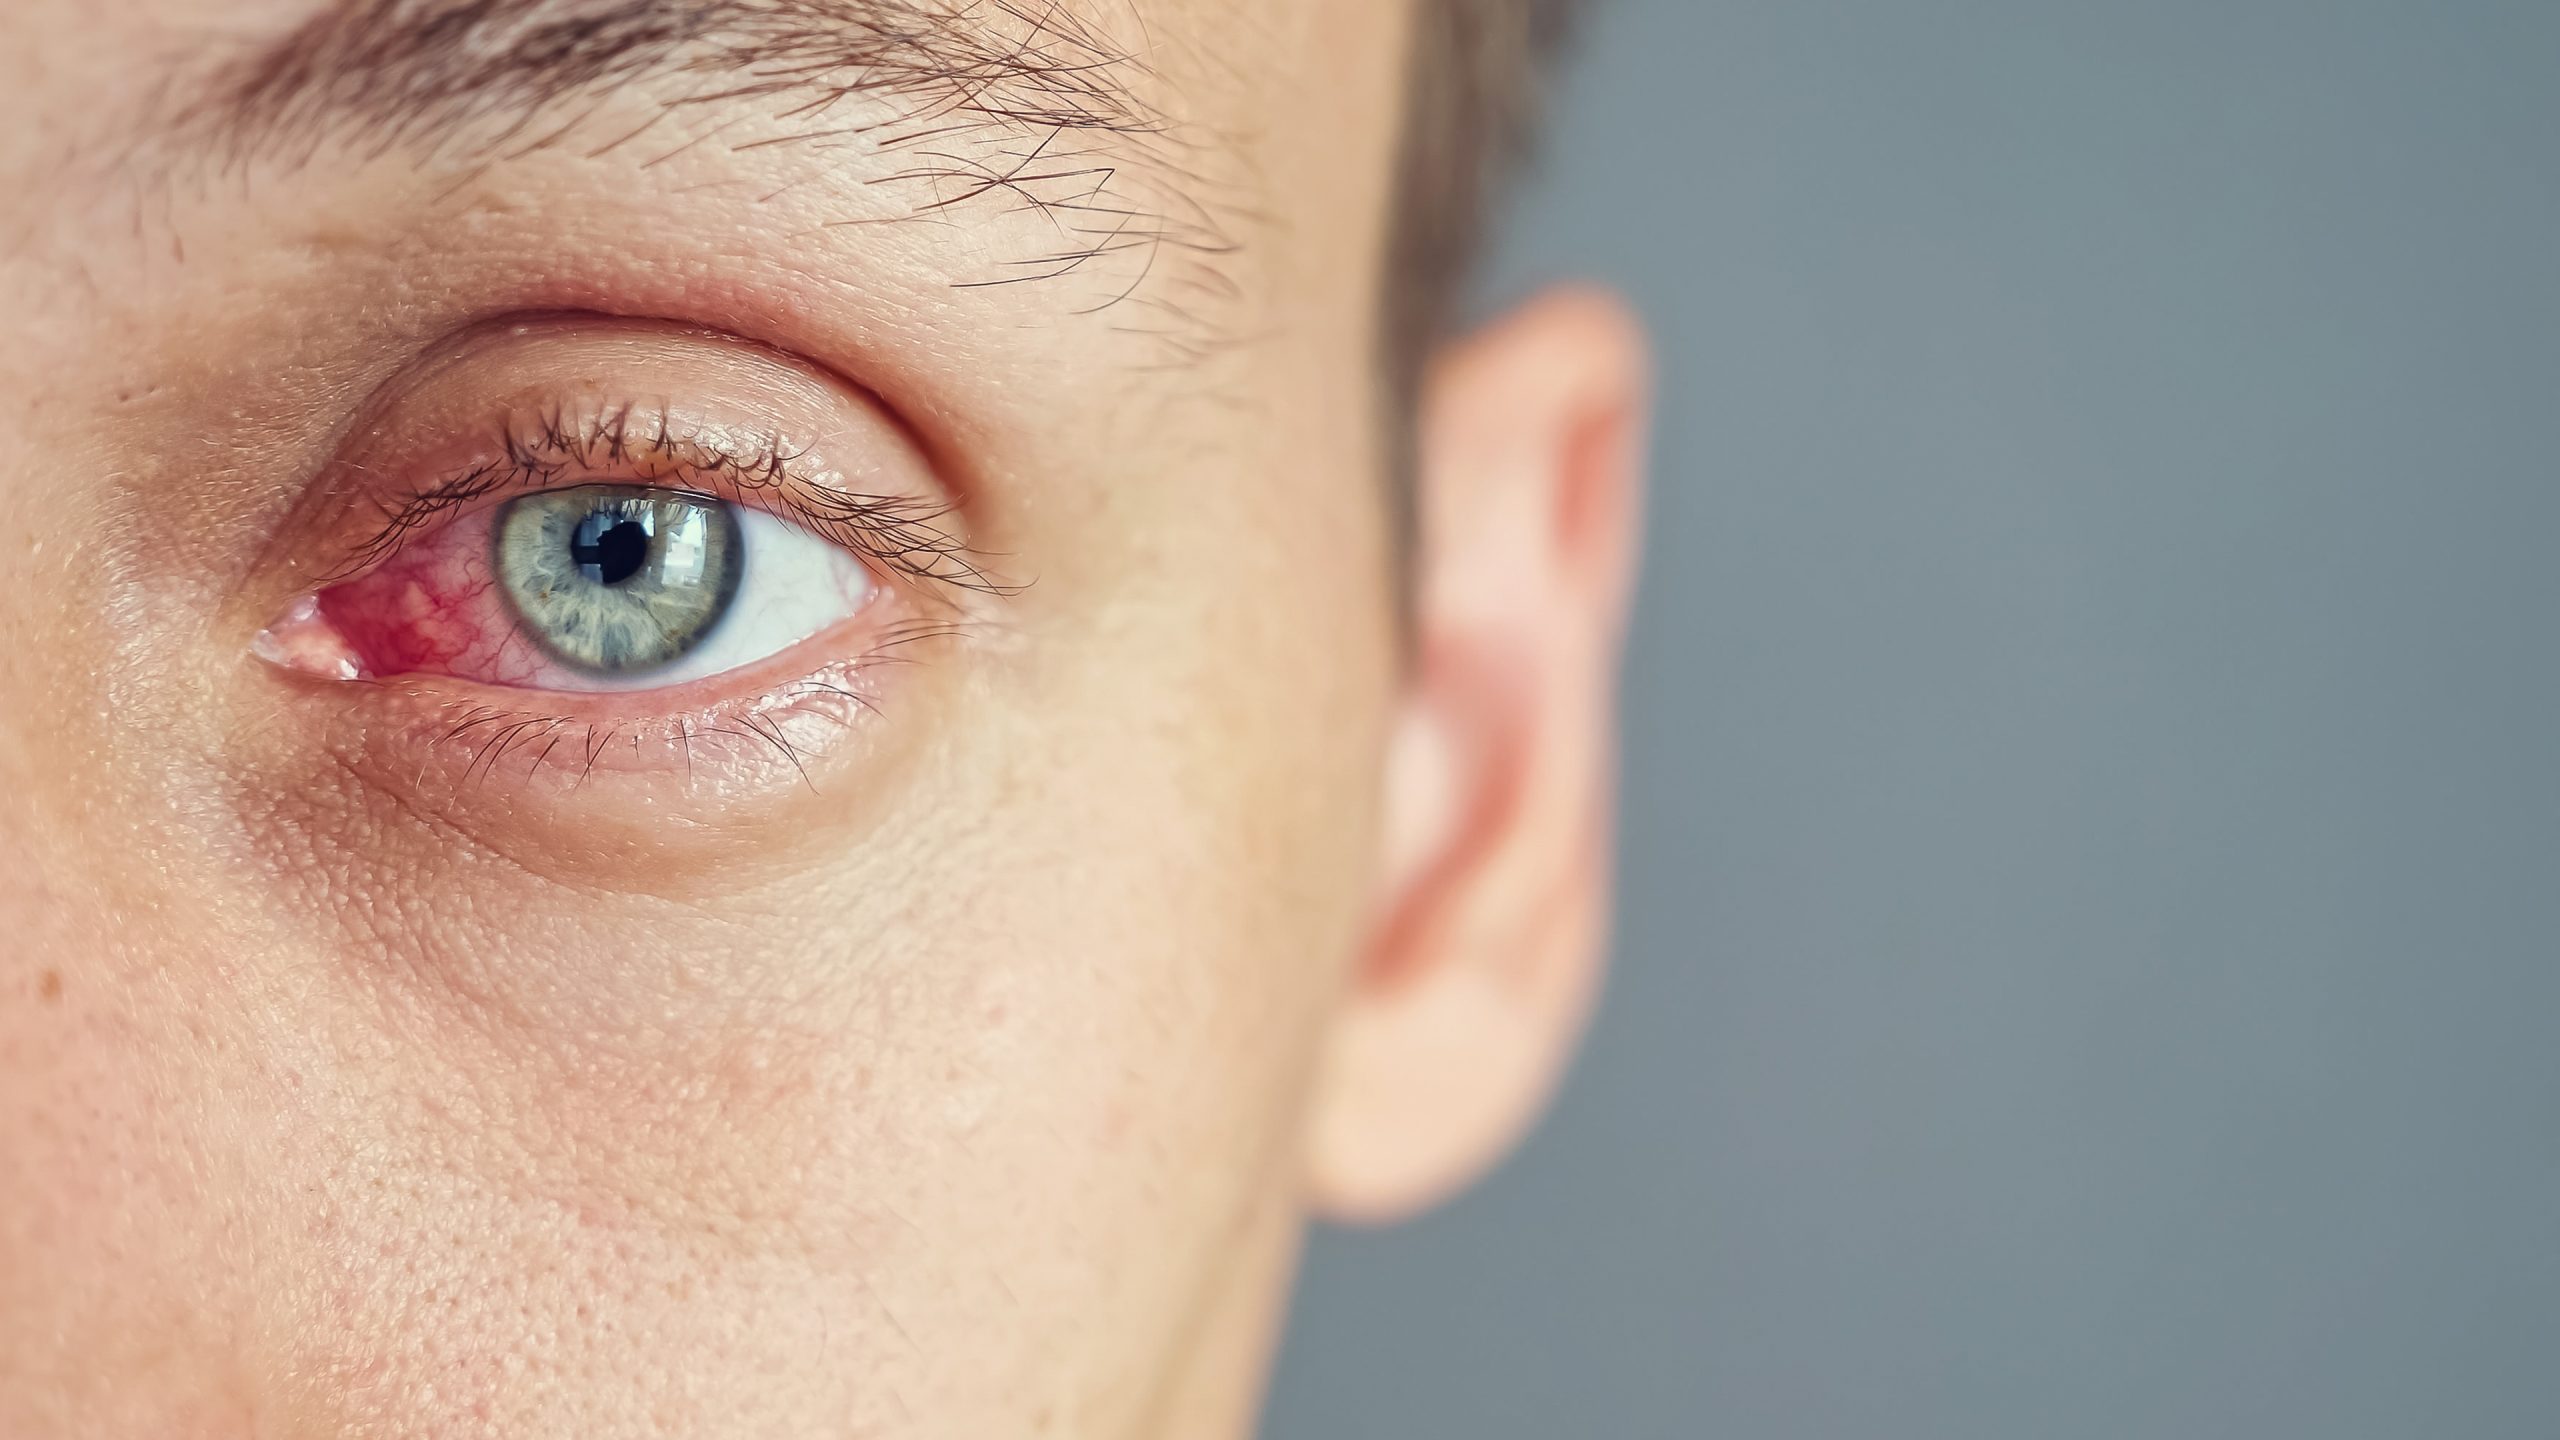 Eyelid Edema Causes, Symptoms, and Treatments